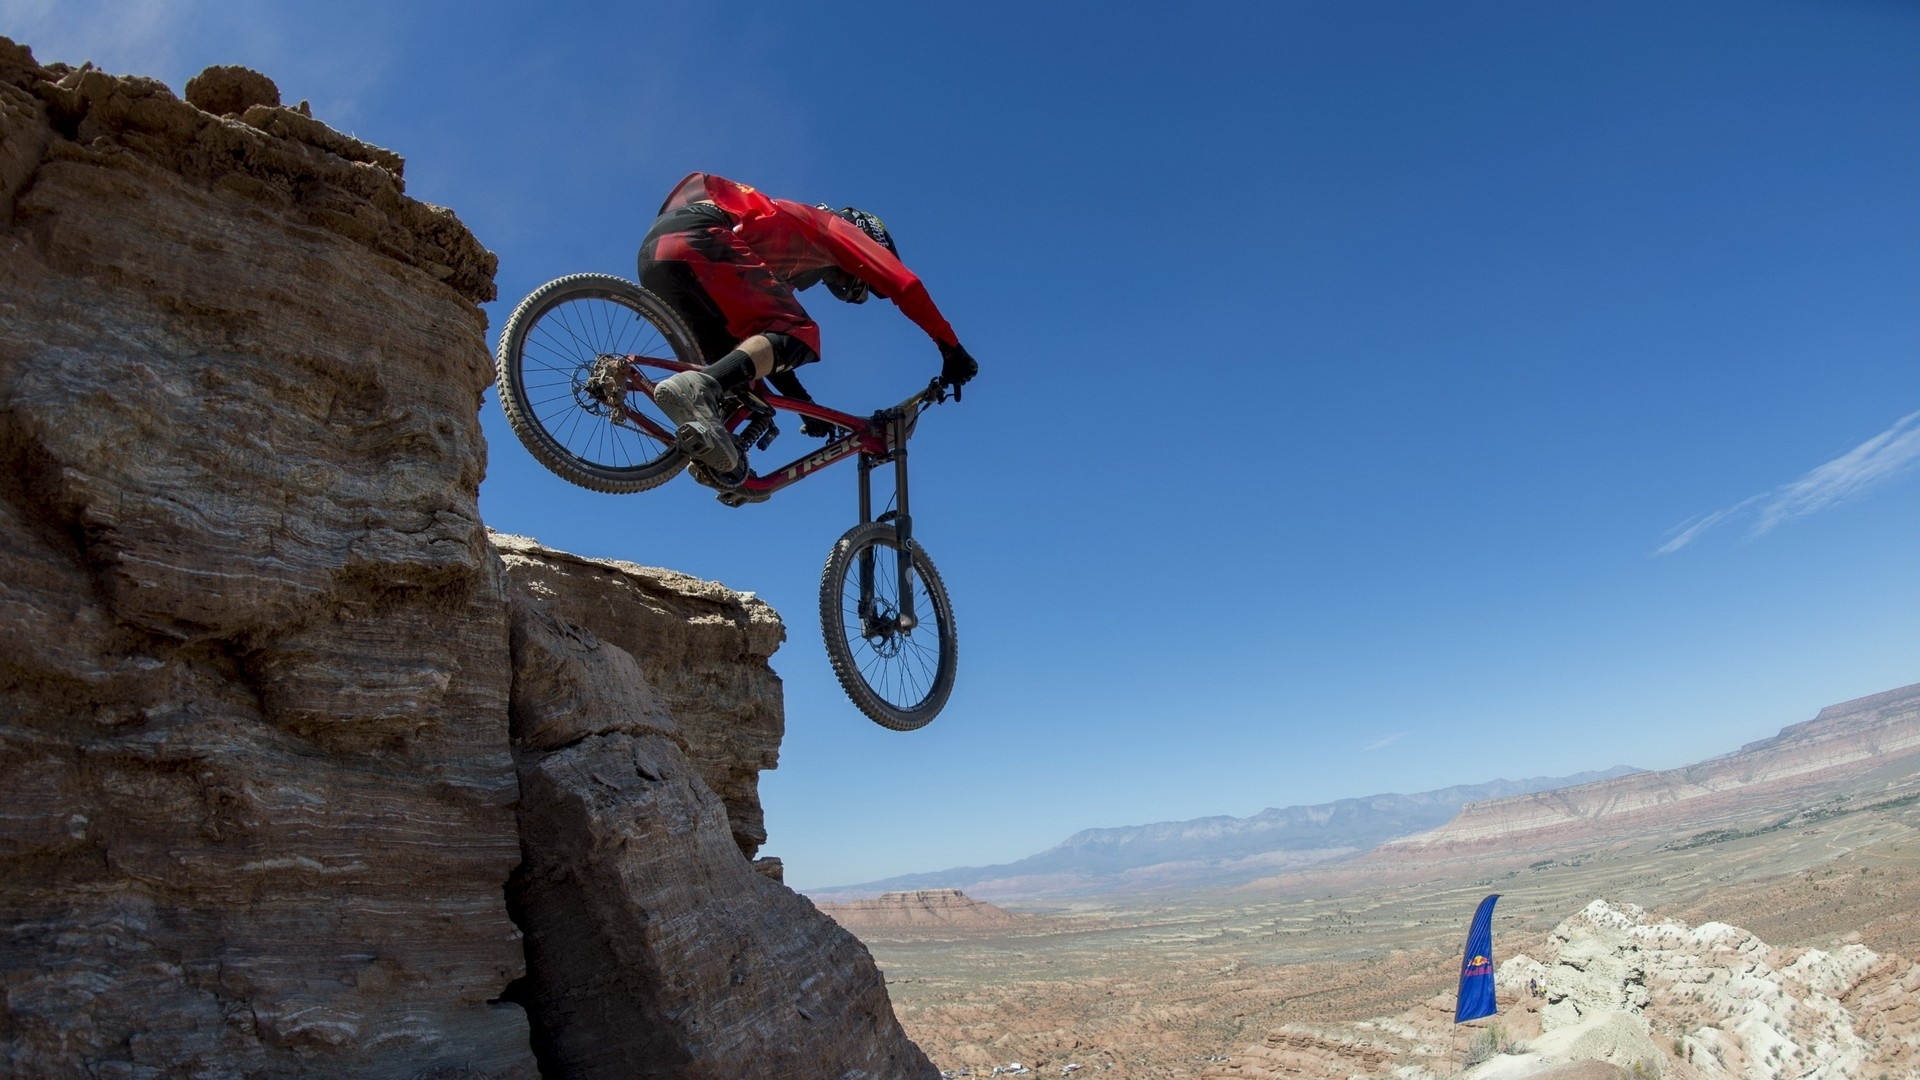 Bicycles Sports Extreme Red Bull Ram Mountain Cliff Landscapes